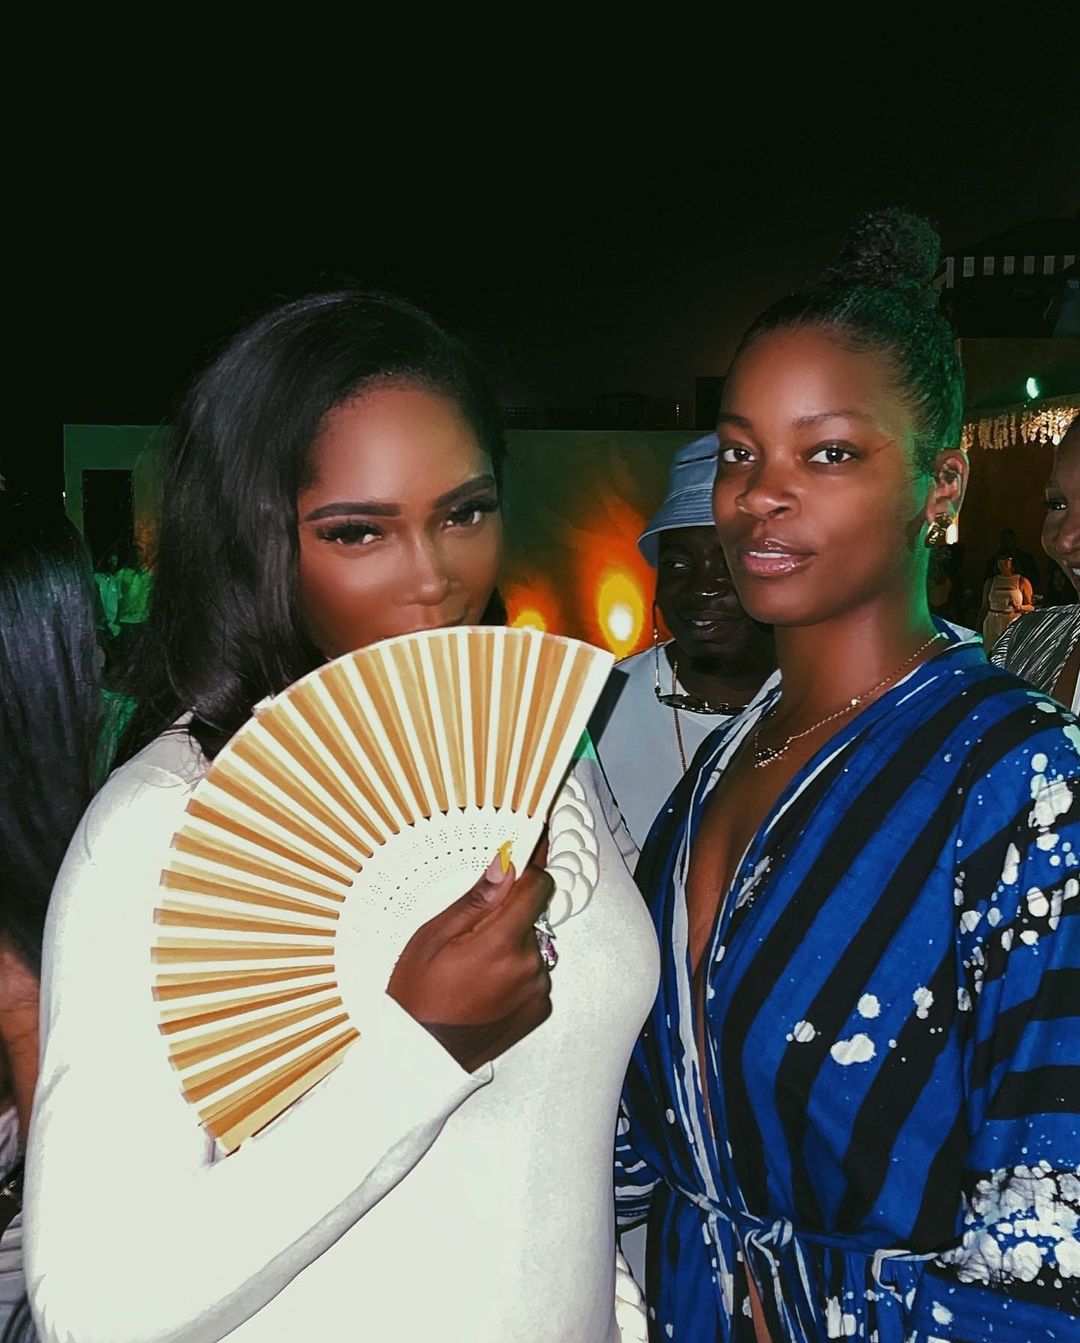 Tiwa Savage with a fan in Accra, Ghana